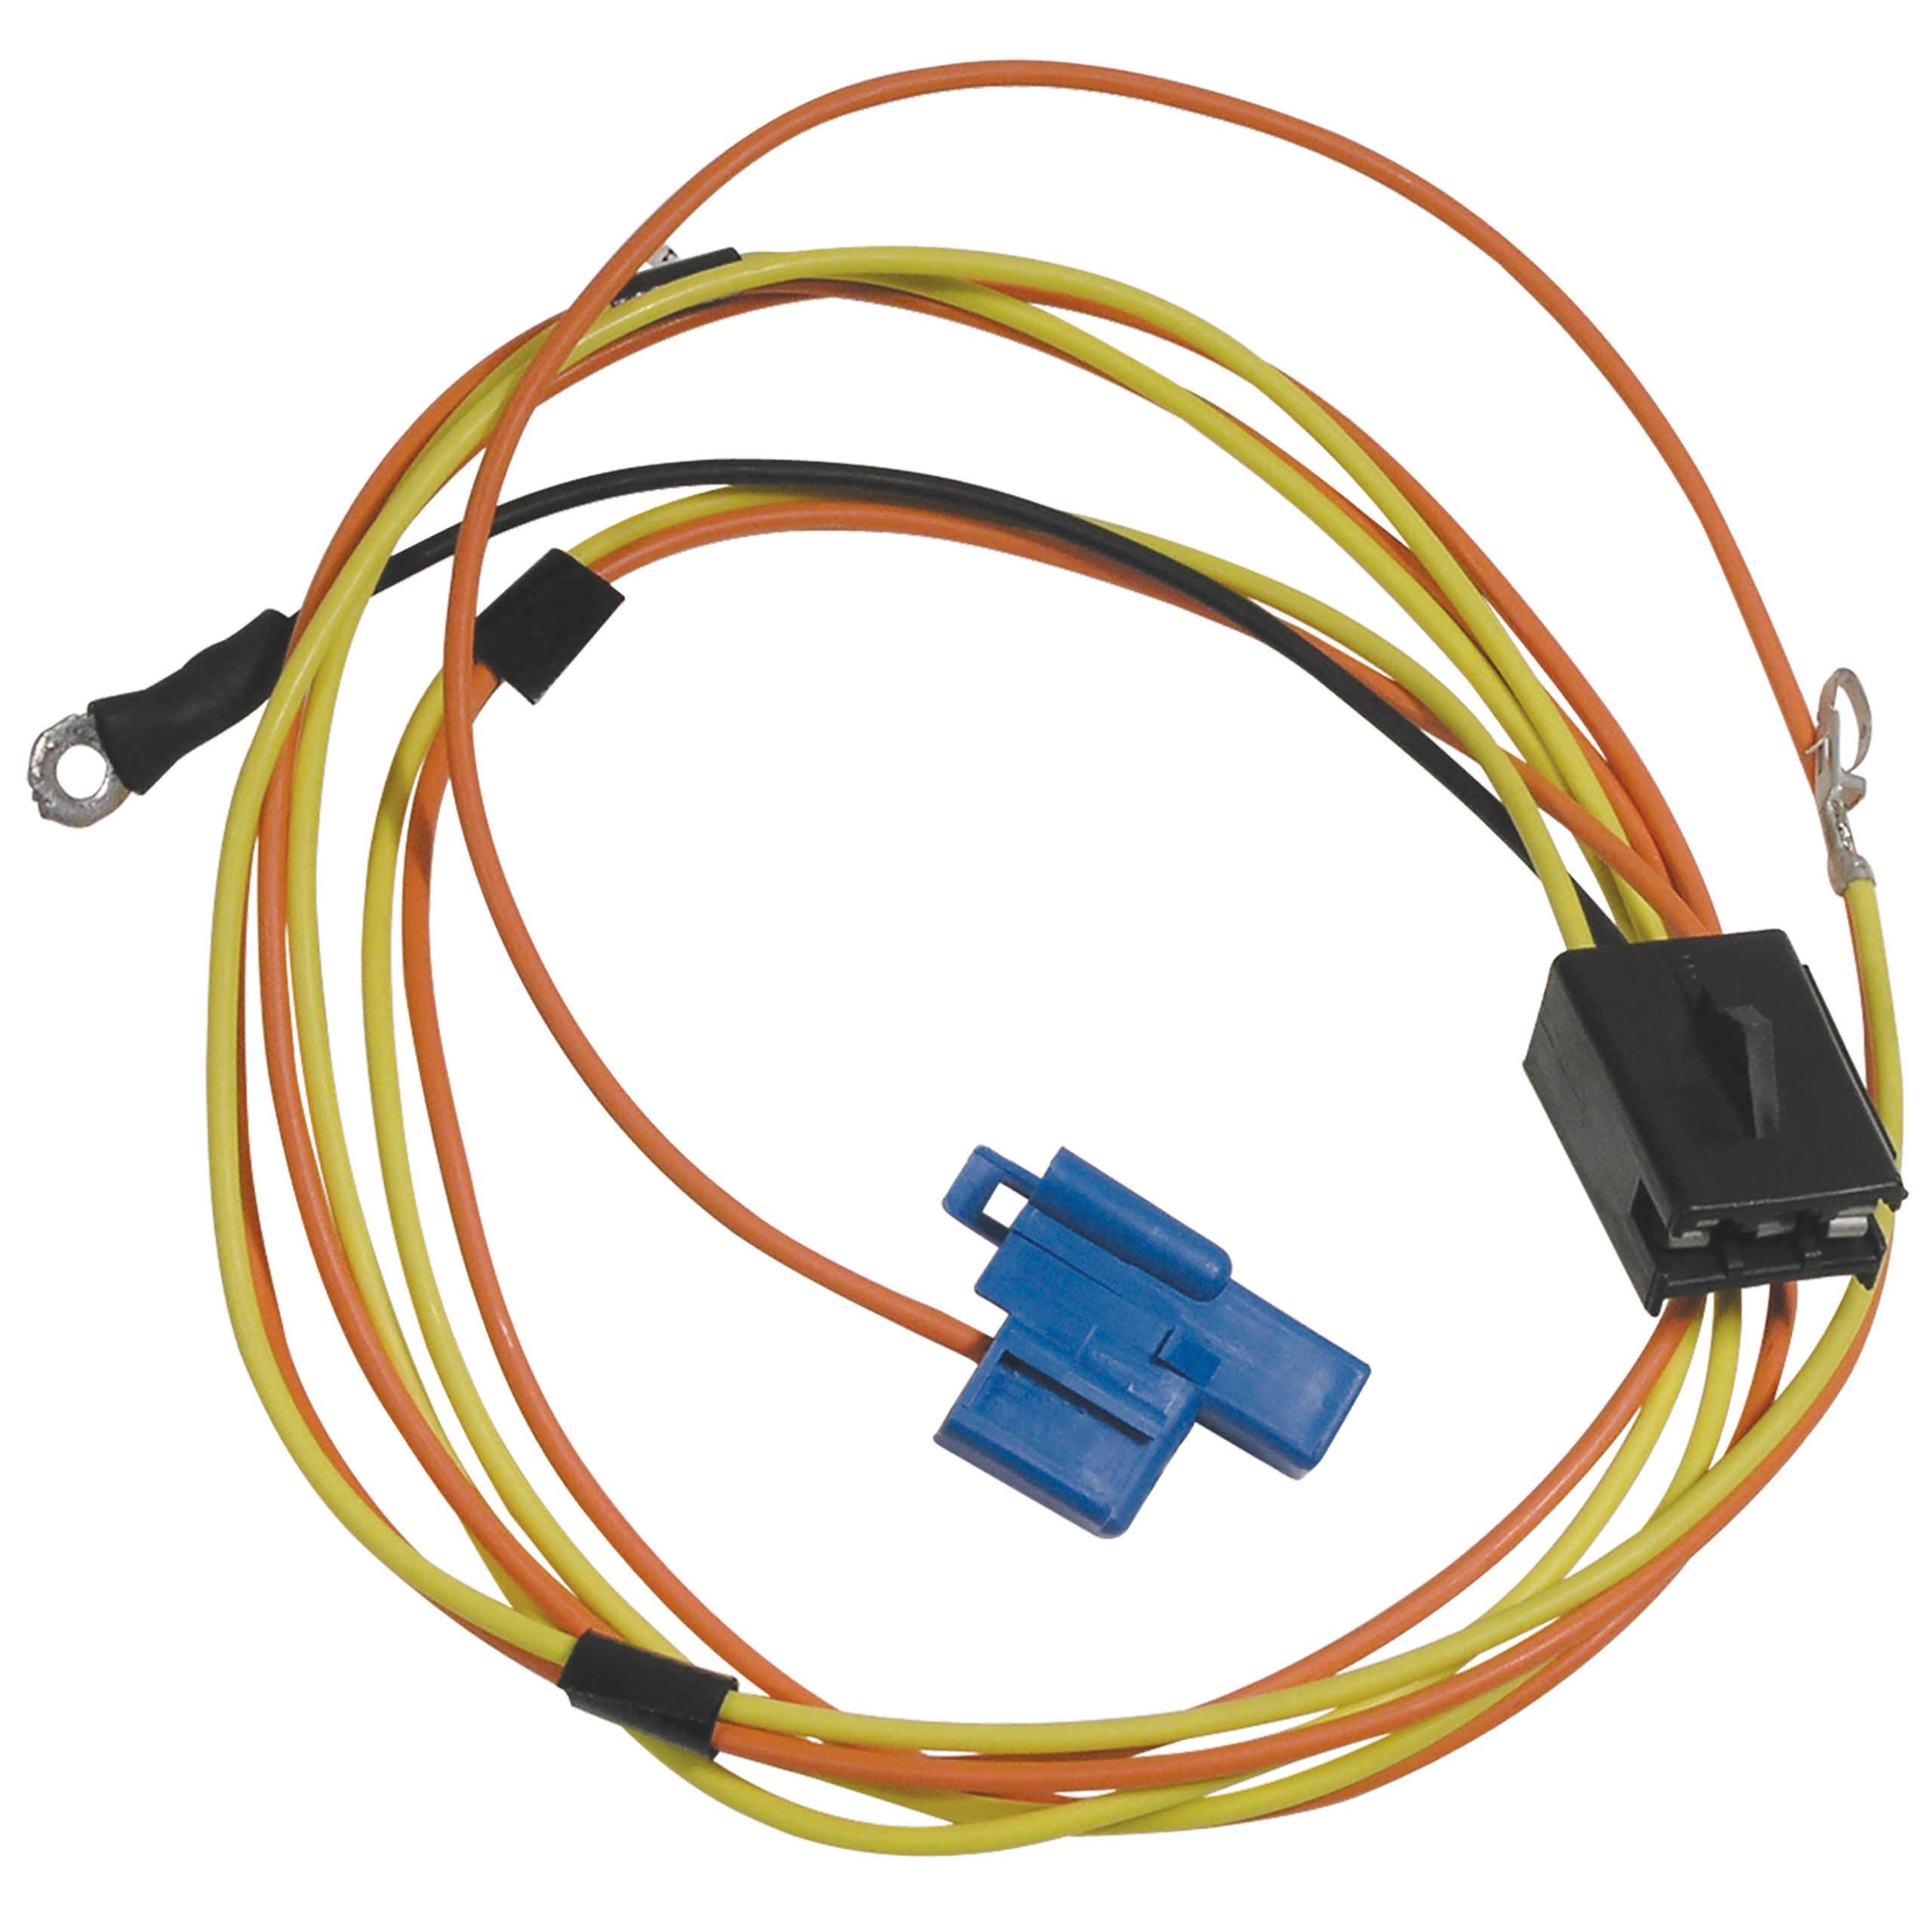 C3 1978 Chevrolet Corvette Harness. Power Antenna Radio To Relay - Lectric Limited, Inc.